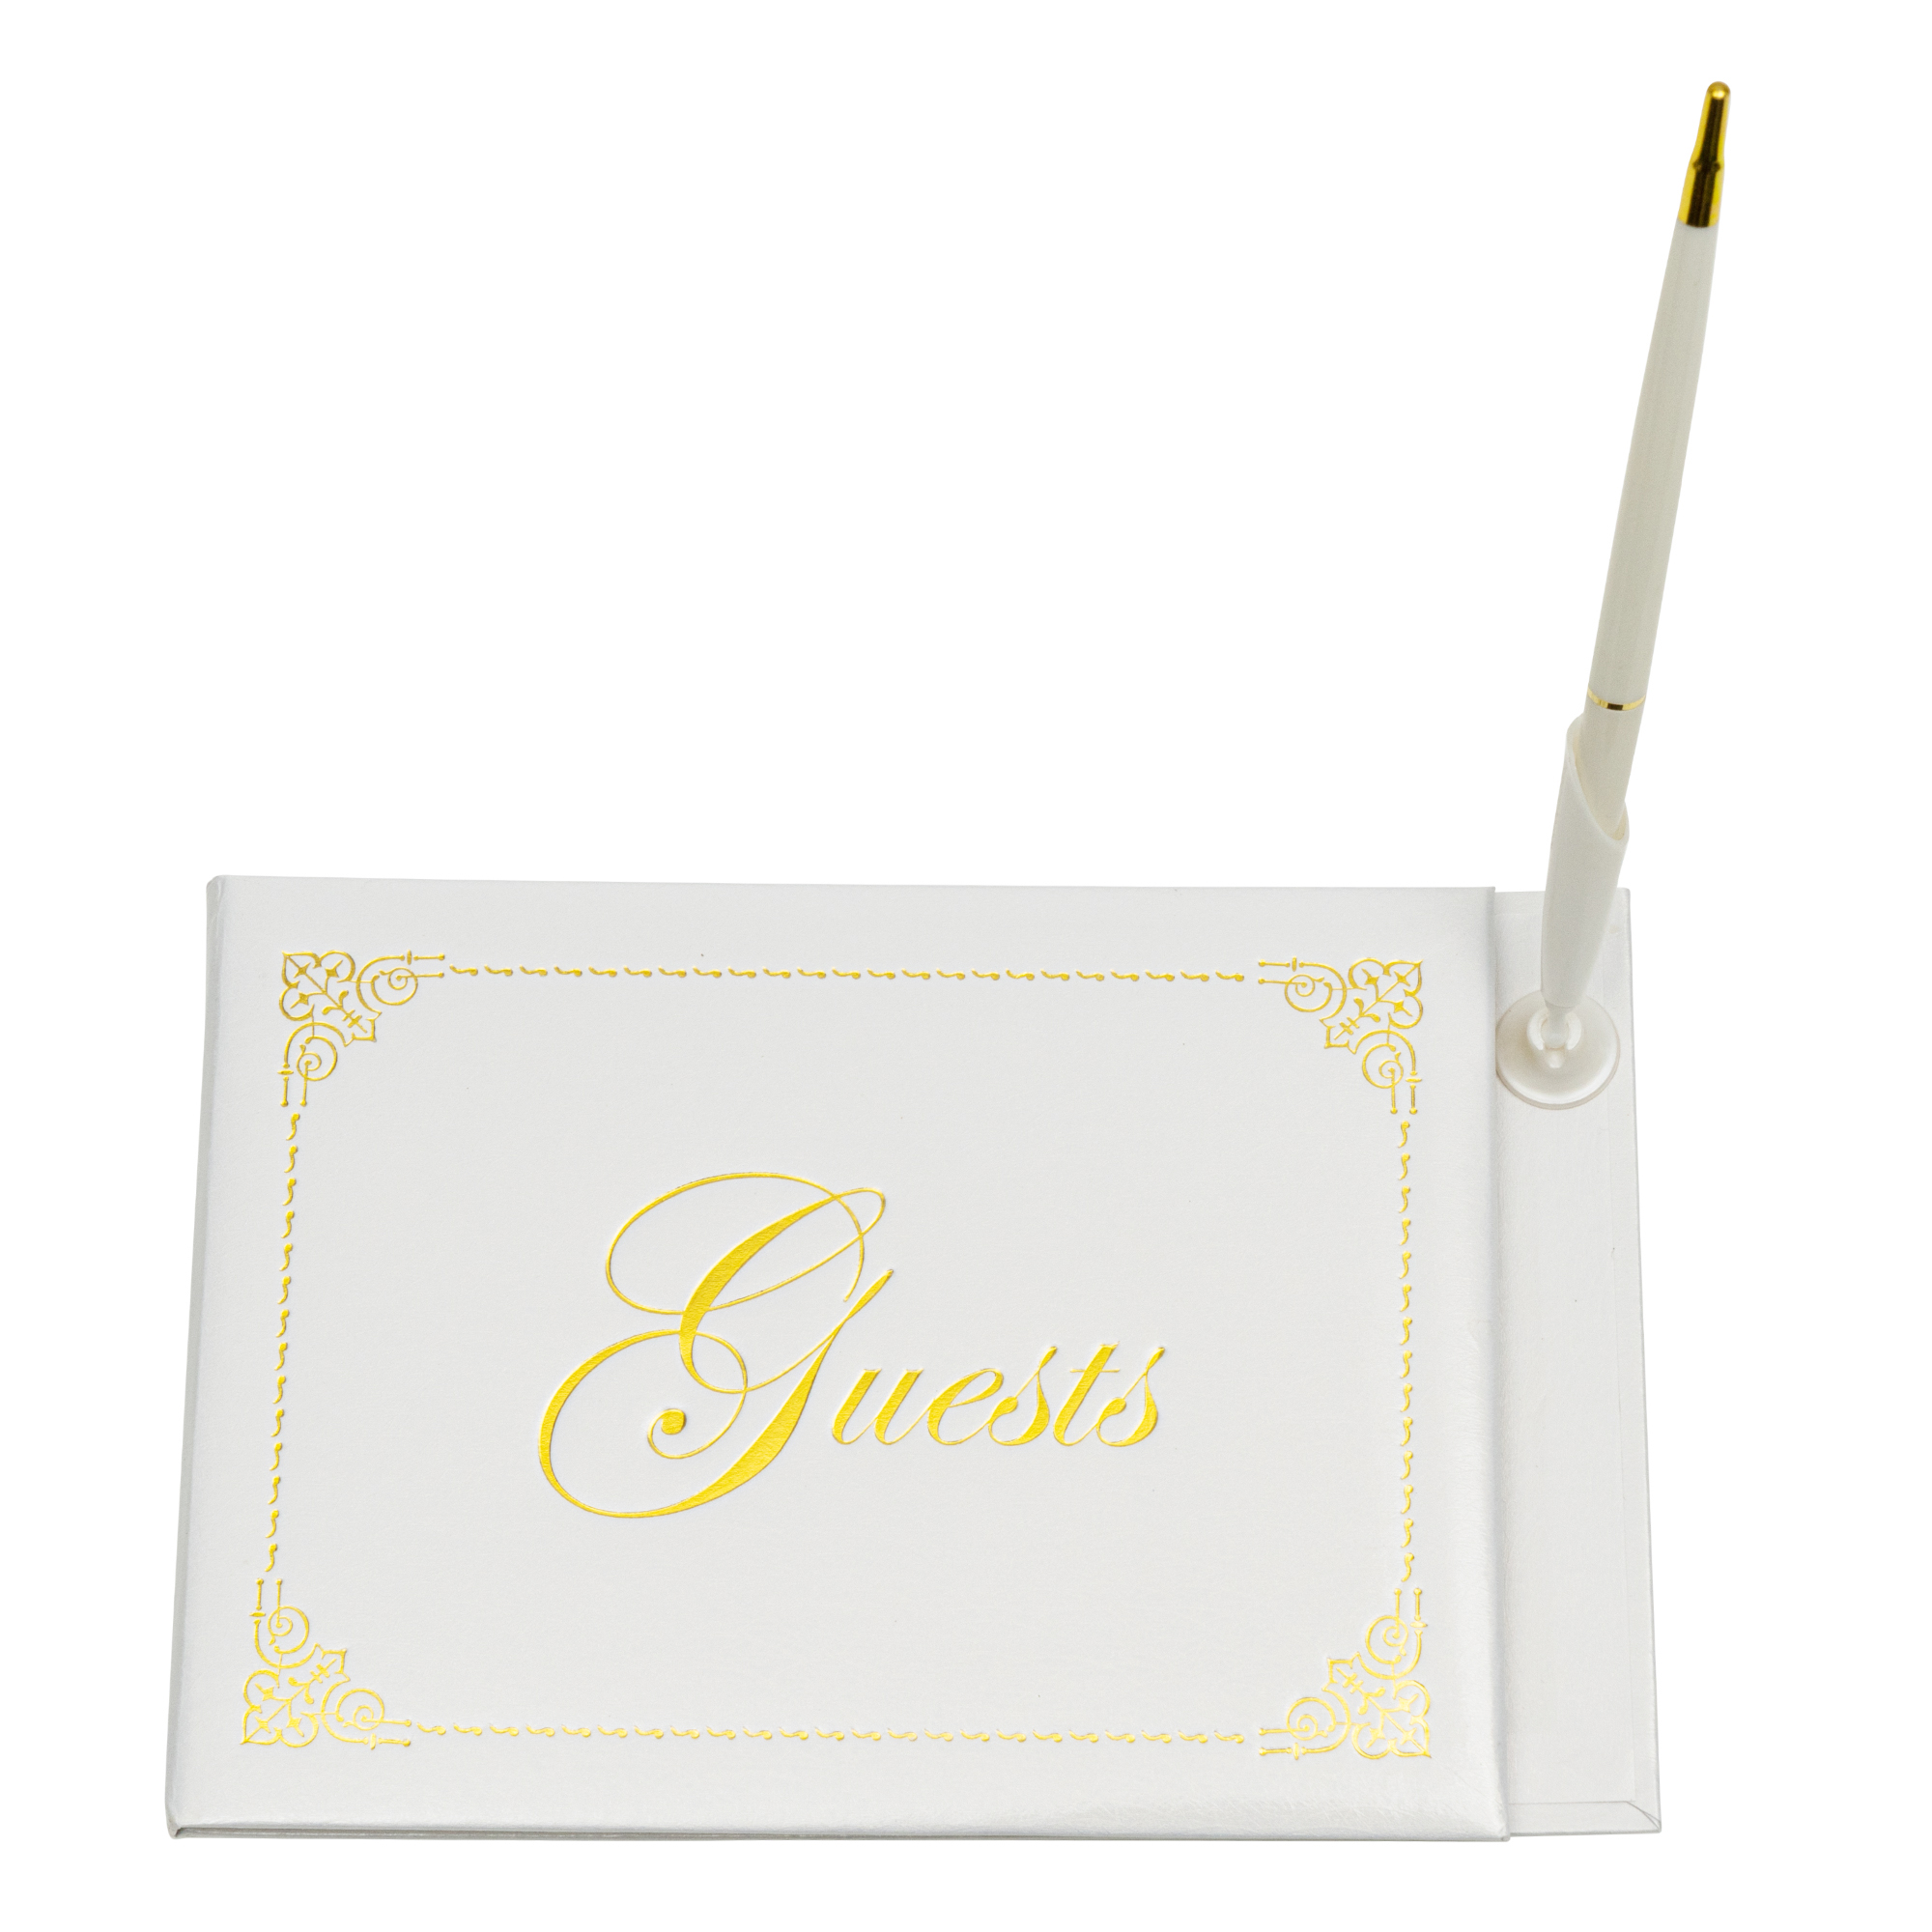 "Guests" Guest Book with Pen in English